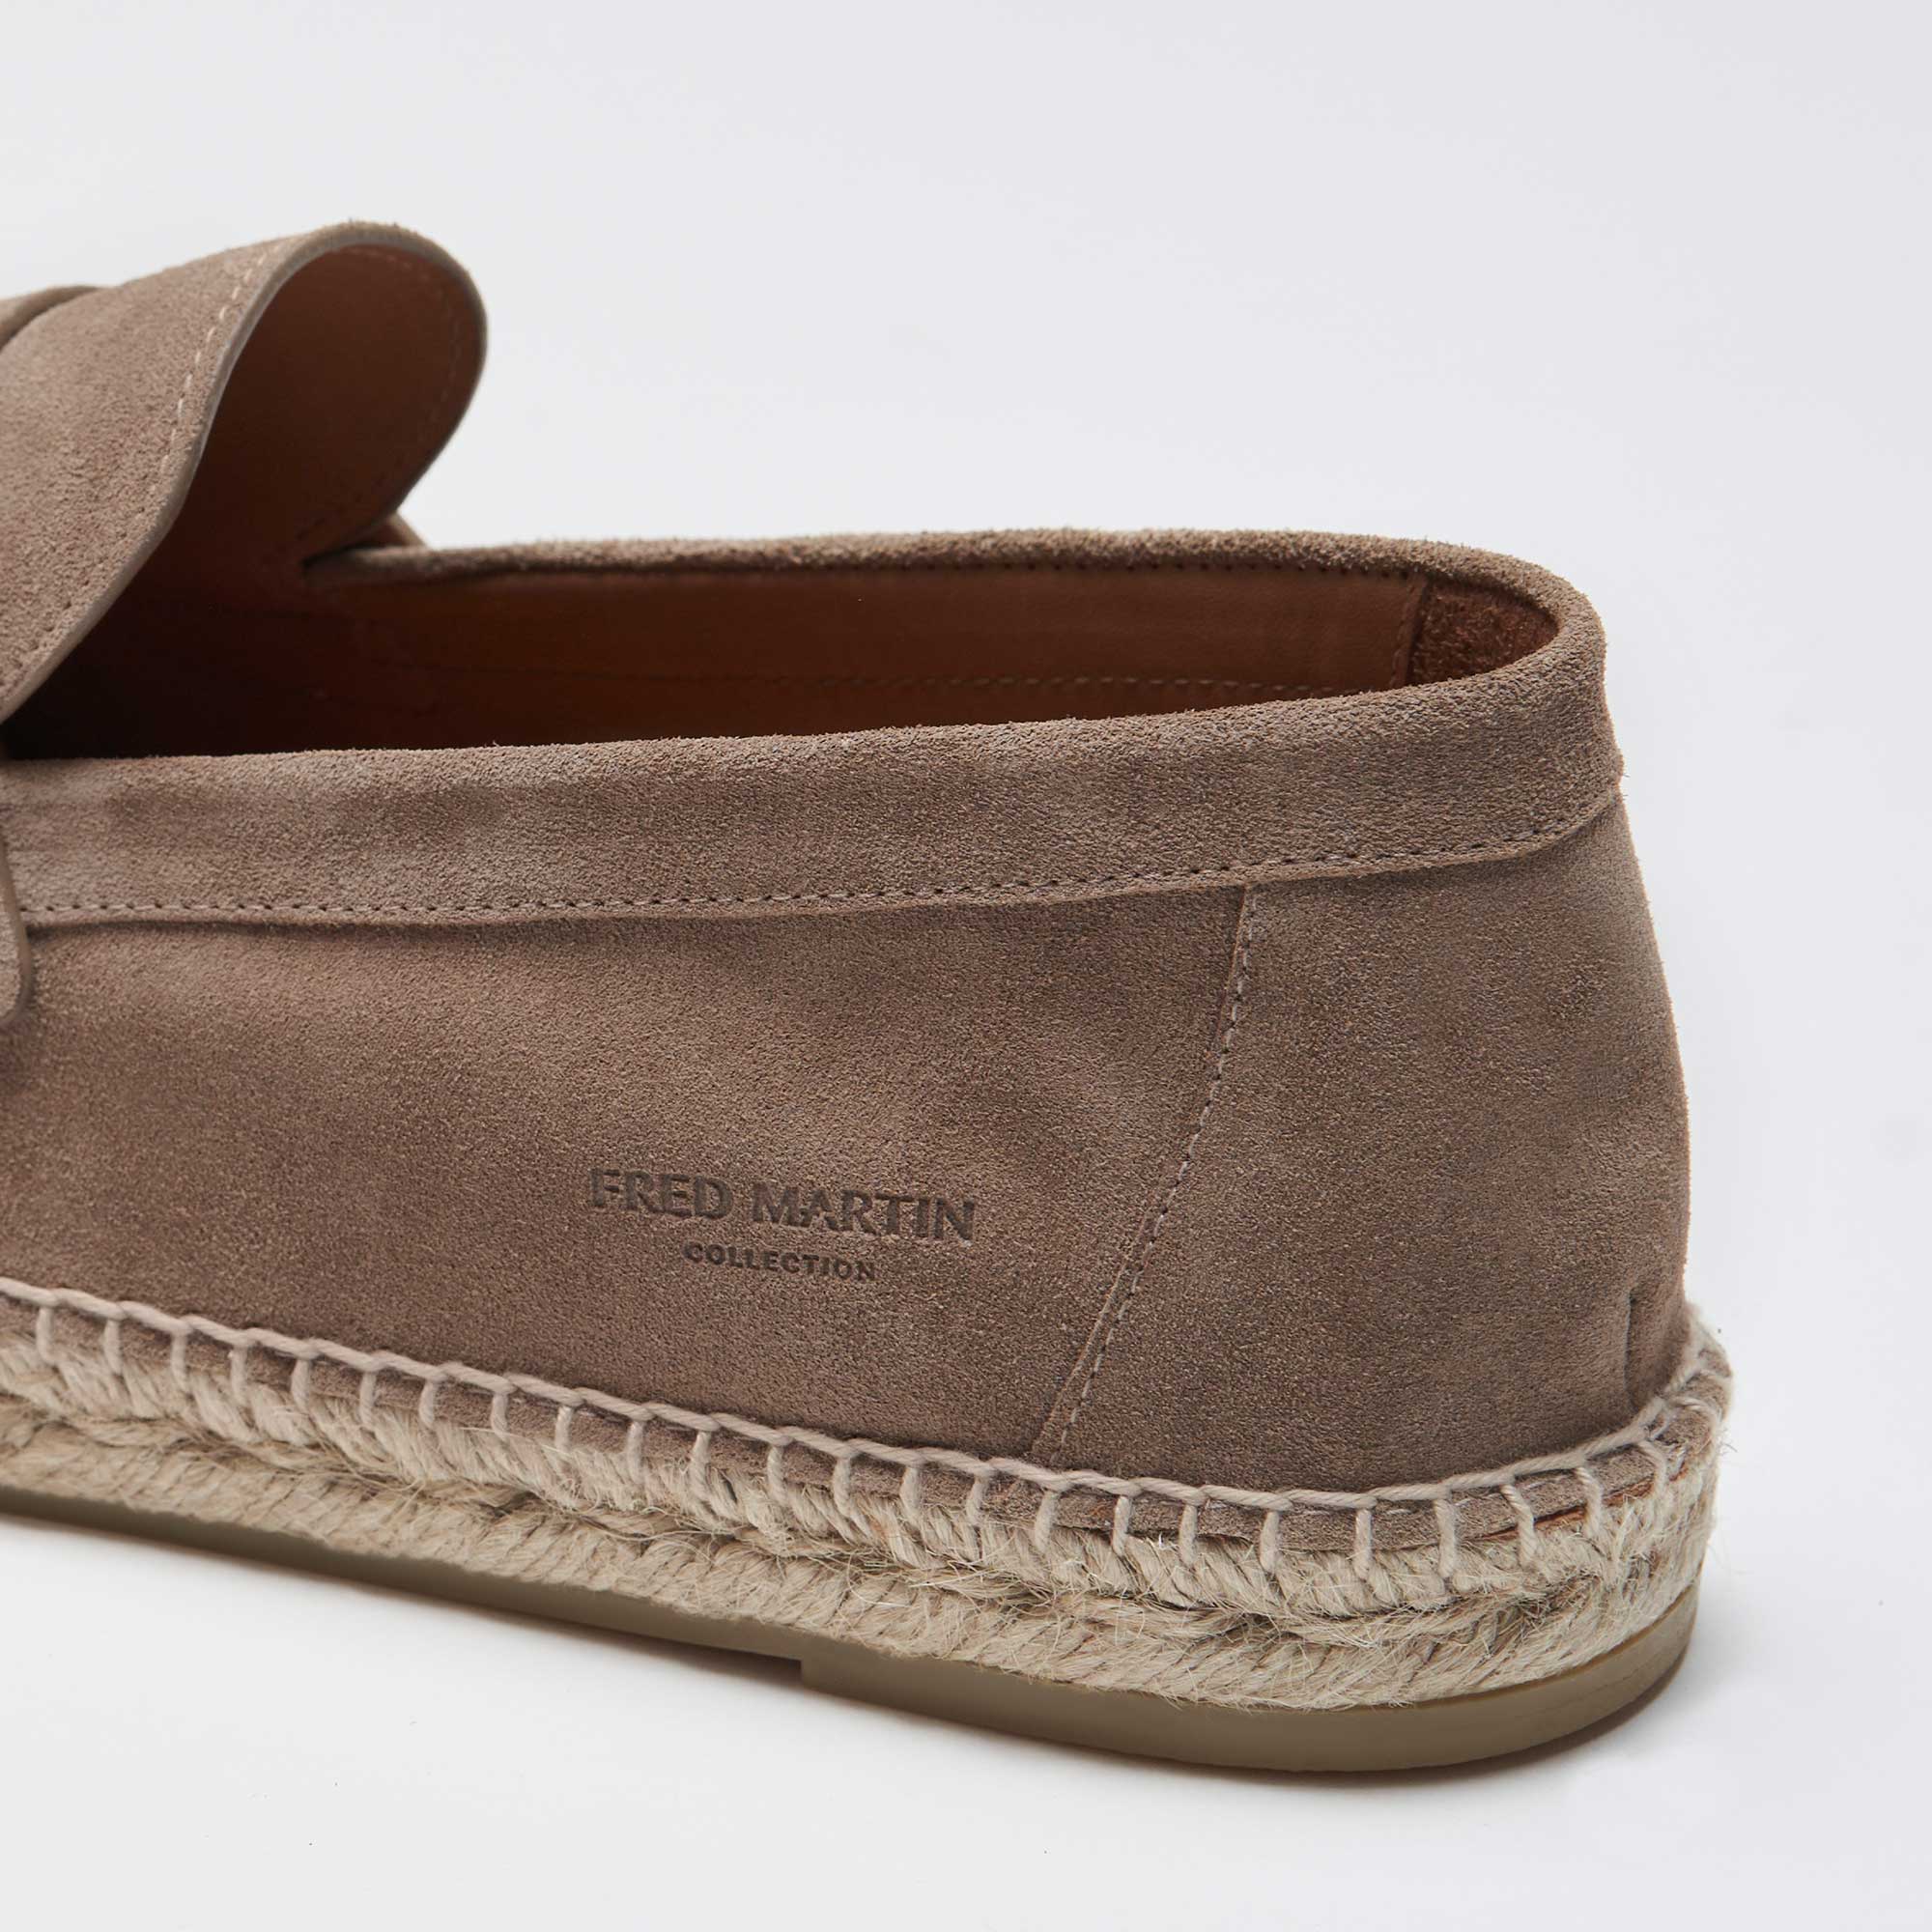 Espadrilles Loafers Taupe Suede Taupe Men. Fred Martin Collection